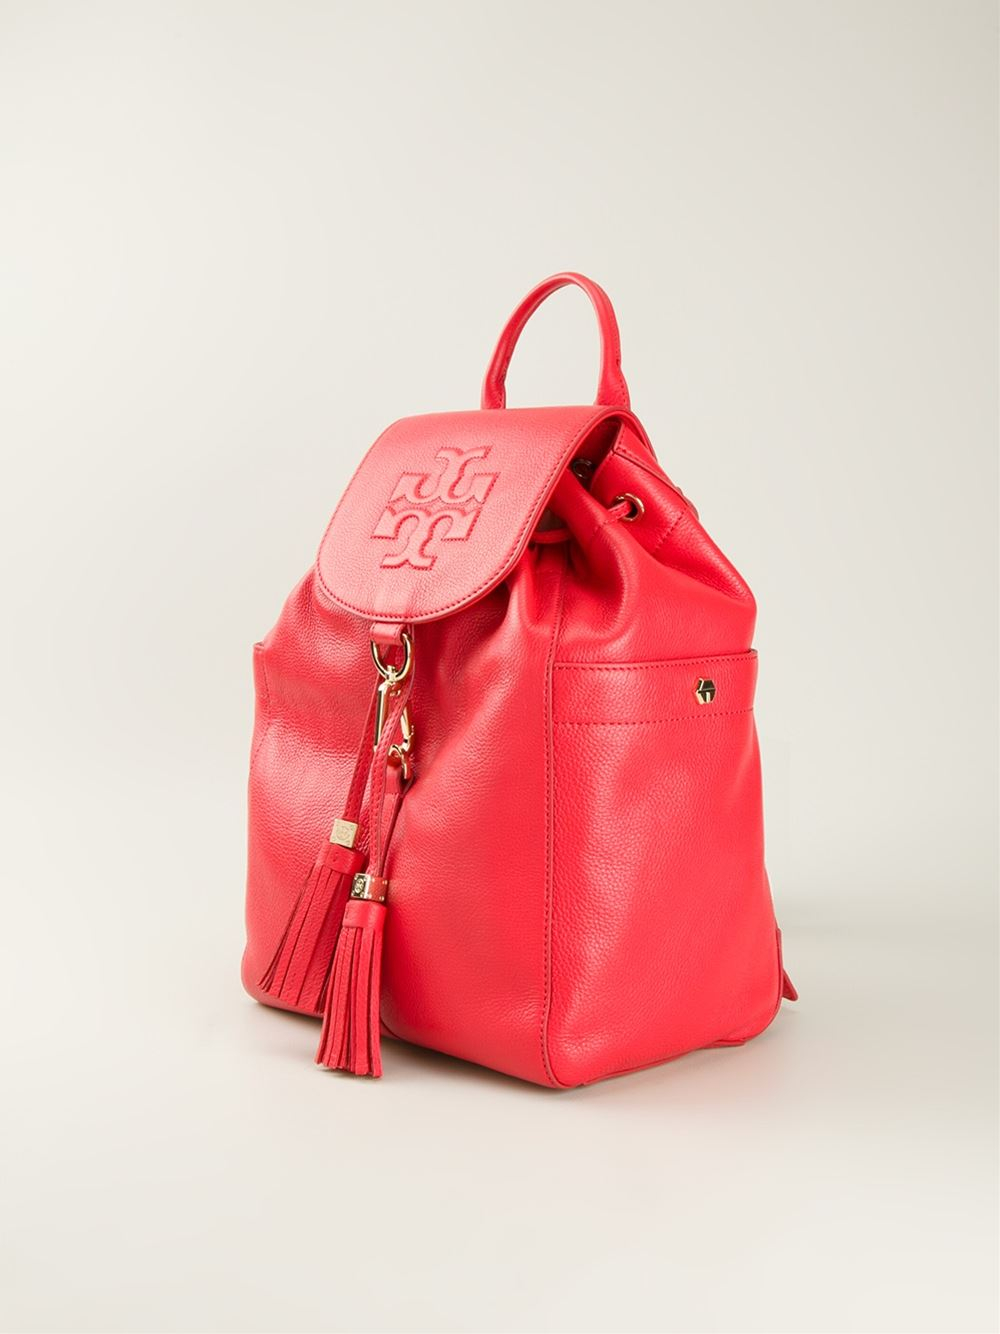 Lyst - Tory Burch Thea Backpack in Red